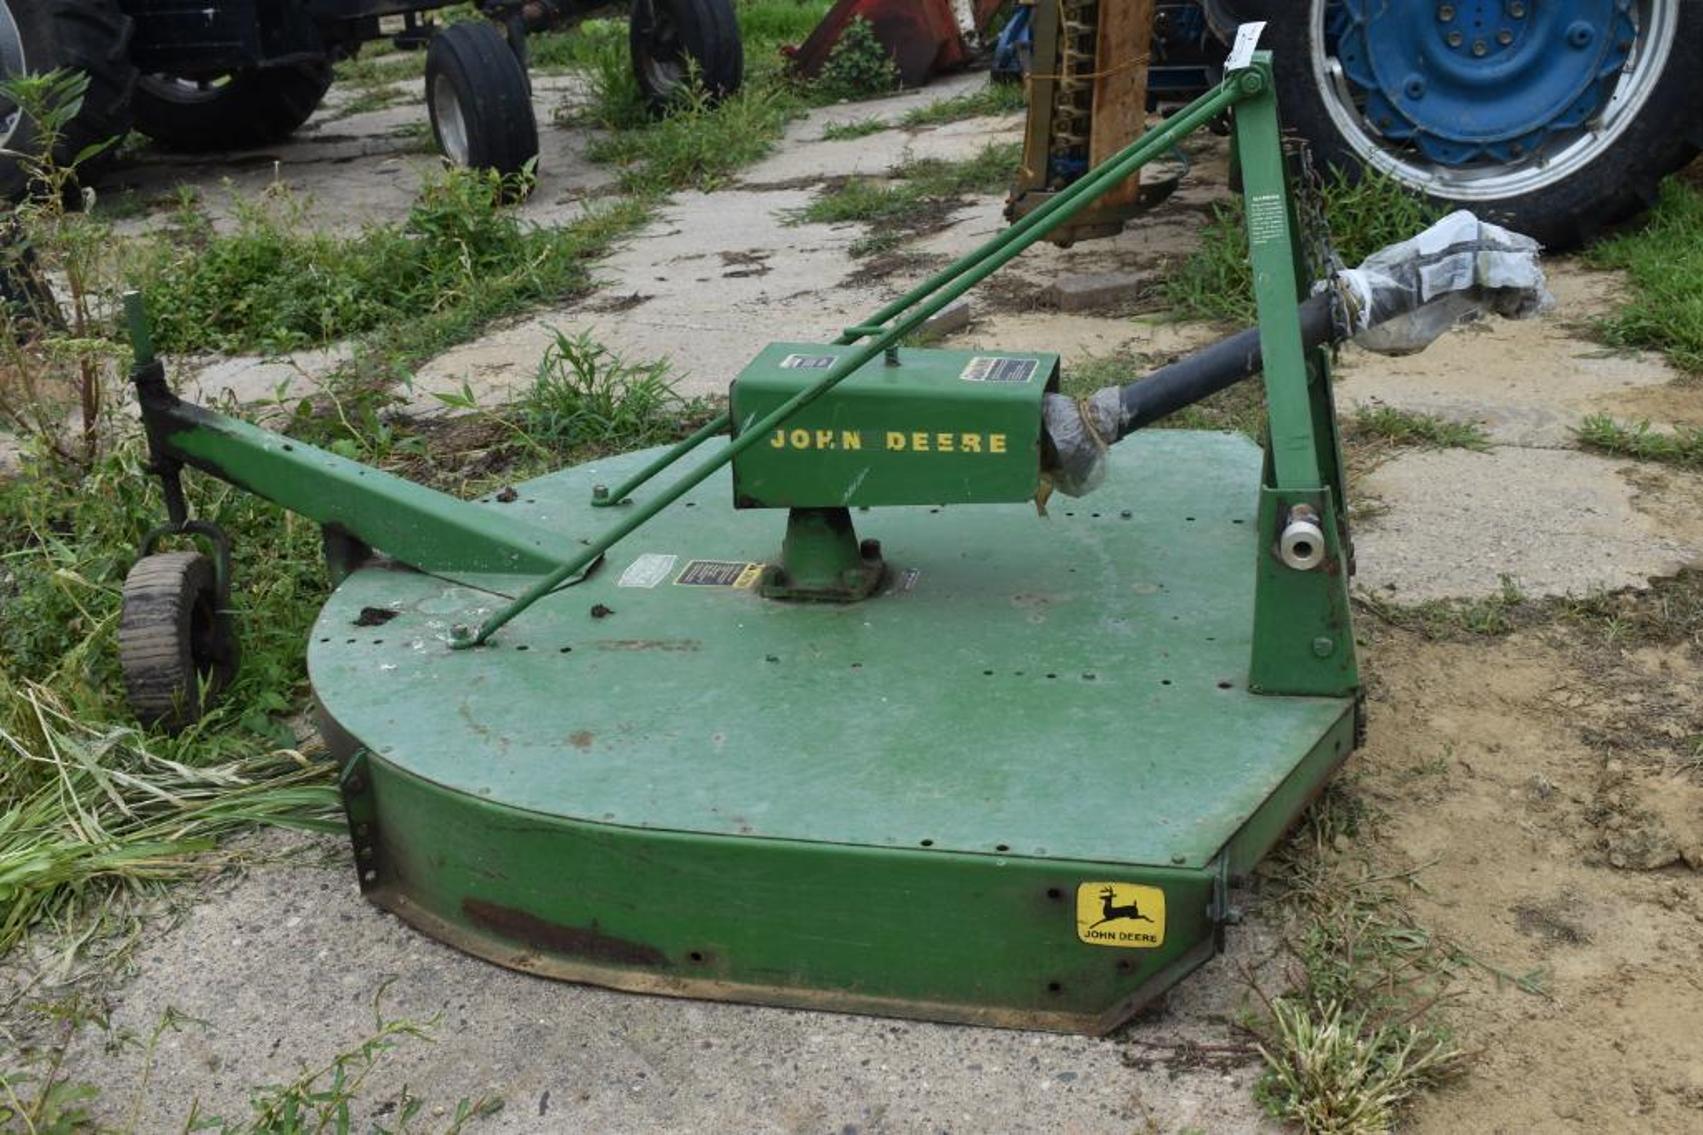 Moving Auction: Tractors, Antiques, Tools